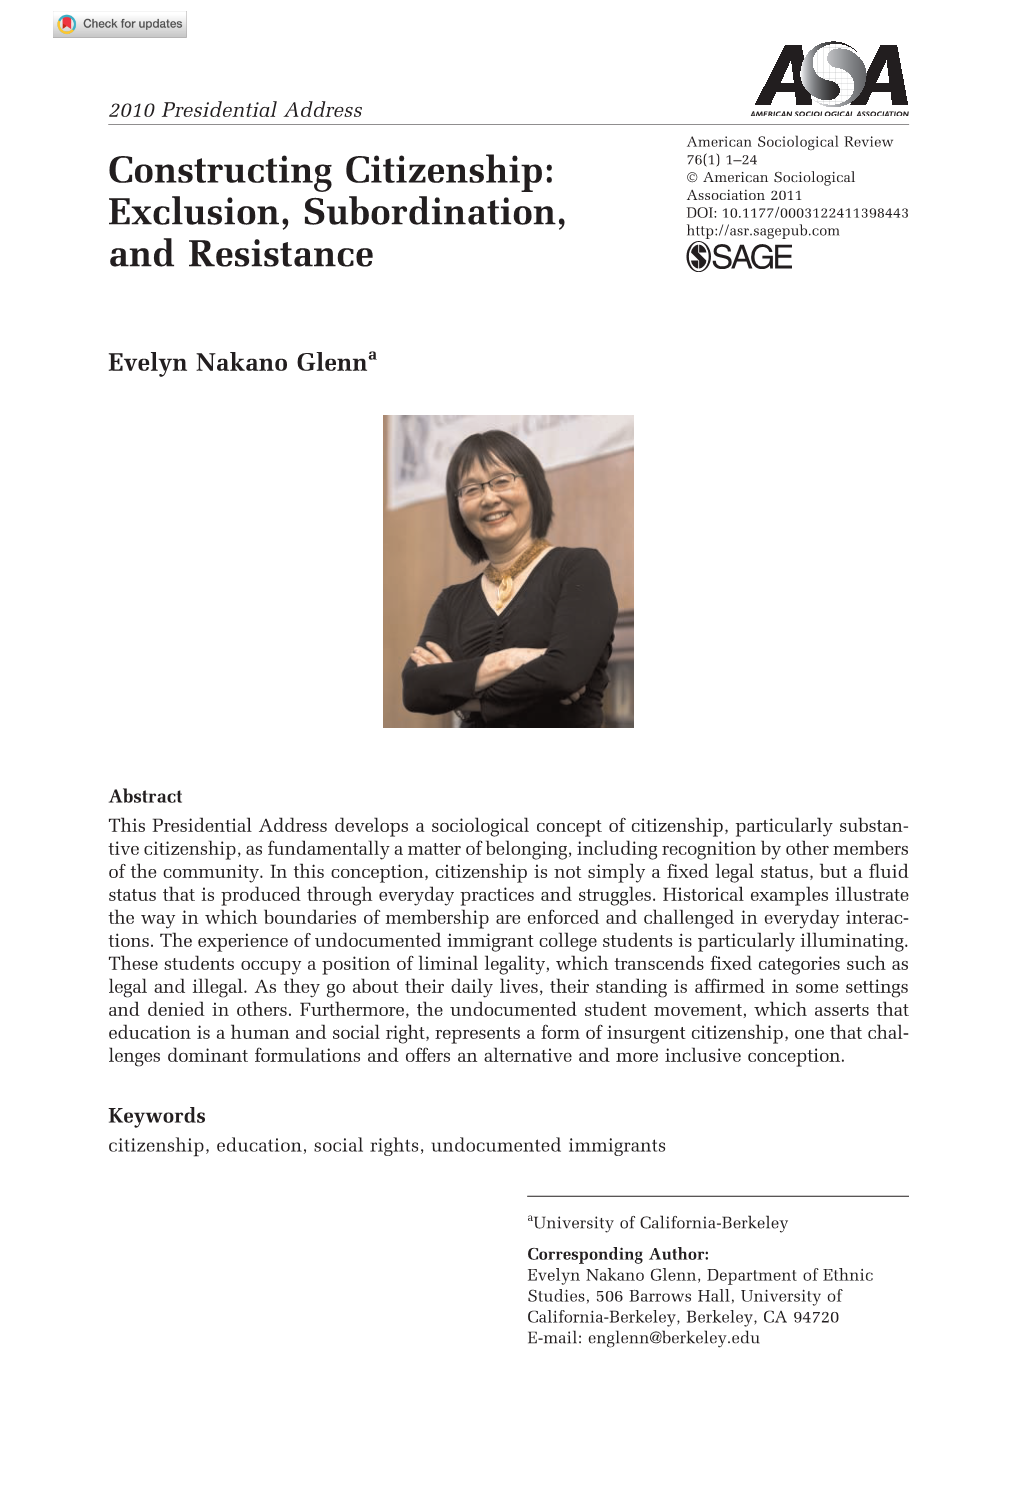 Constructing Citizenship: Exclusion, Subordination, and Resistance